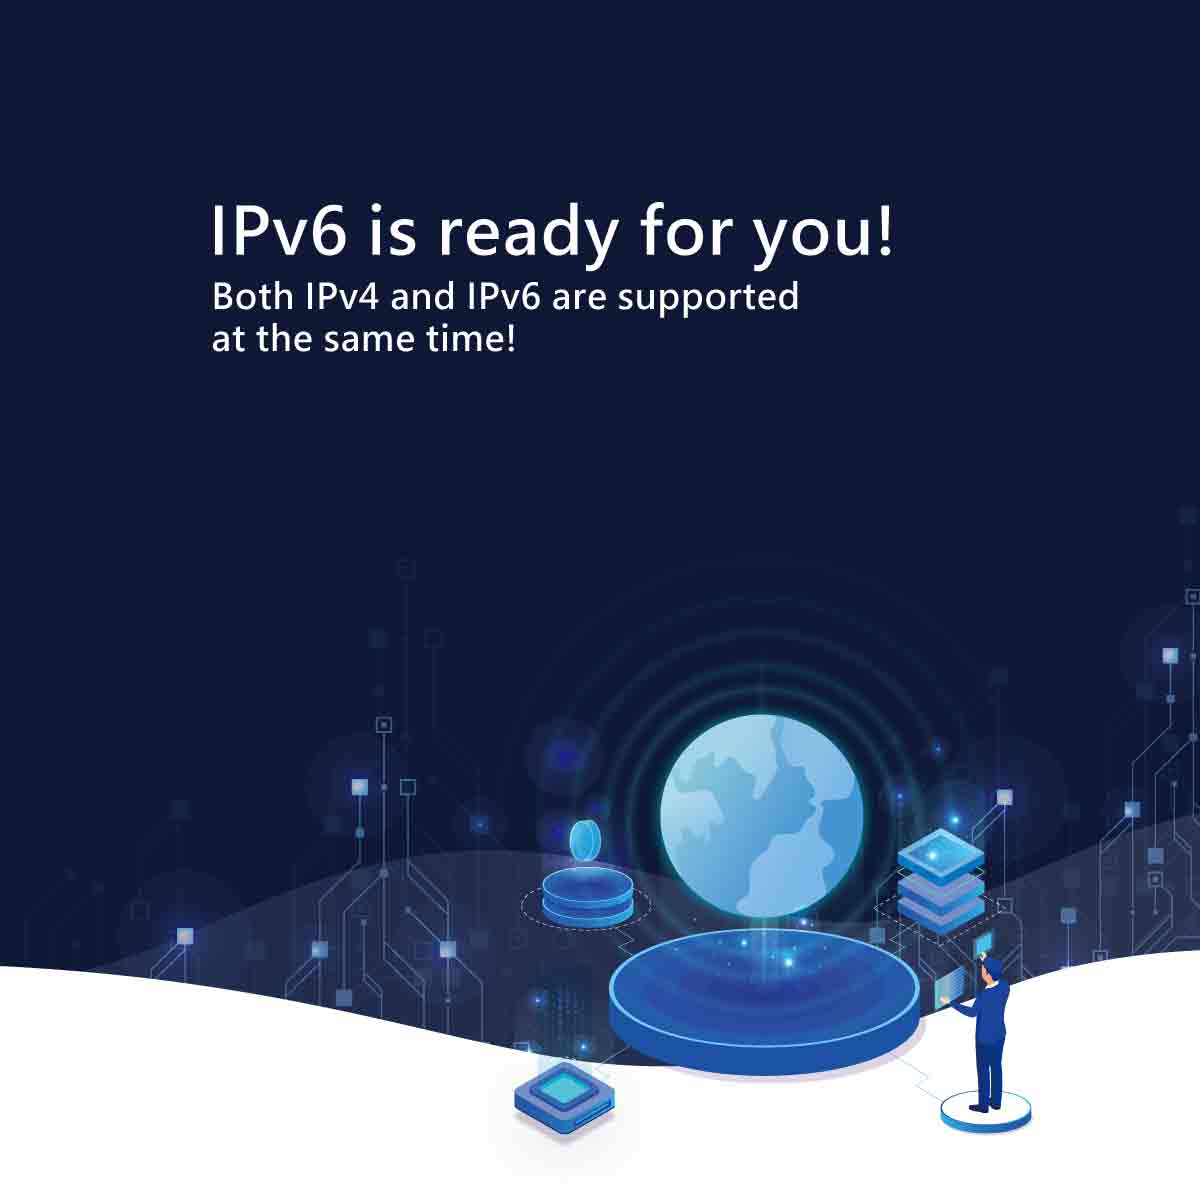 Both IPv4 and IPv6 are supported at the same time